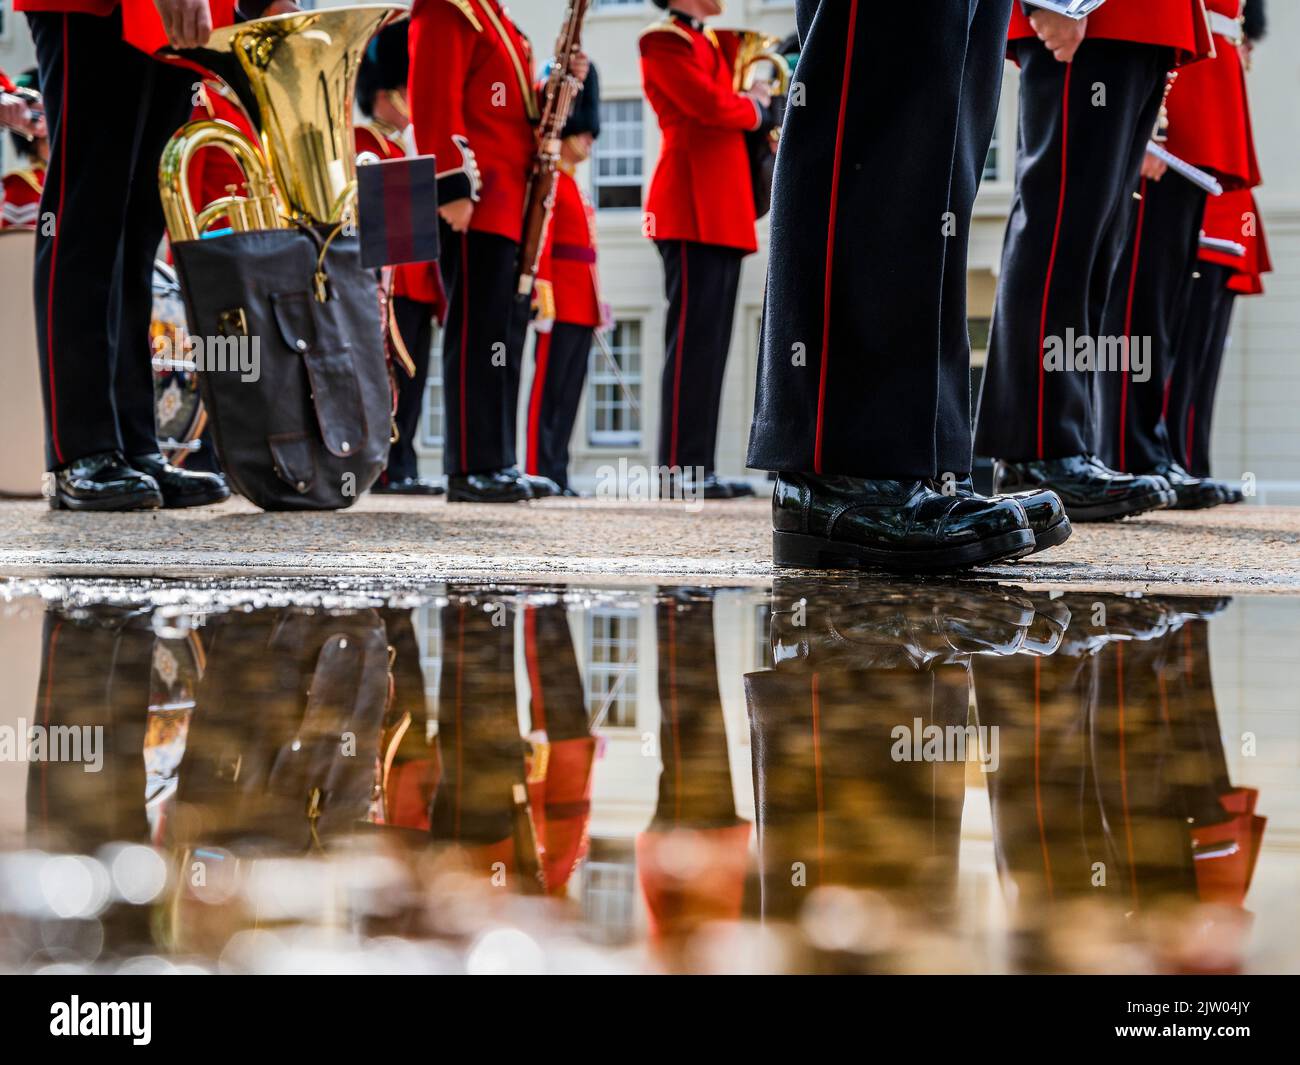 London, UK. 2nd Sep, 2022. The Irish Guards form two new Companies and Number 12 Company forms up for inspection at Wellington Barracks and Mounts the Queen's Guard at Buckingham Palace - As part of the Army's modernisation programme ‘Future Soldier', two new Foot Guards Public Duties Companies (PDCs), are being formed, resurrecting the traditions and ethos of the historic and battle honoured 2nd Battalion Irish Guards. Credit: Guy Bell/Alamy Live News Stock Photo